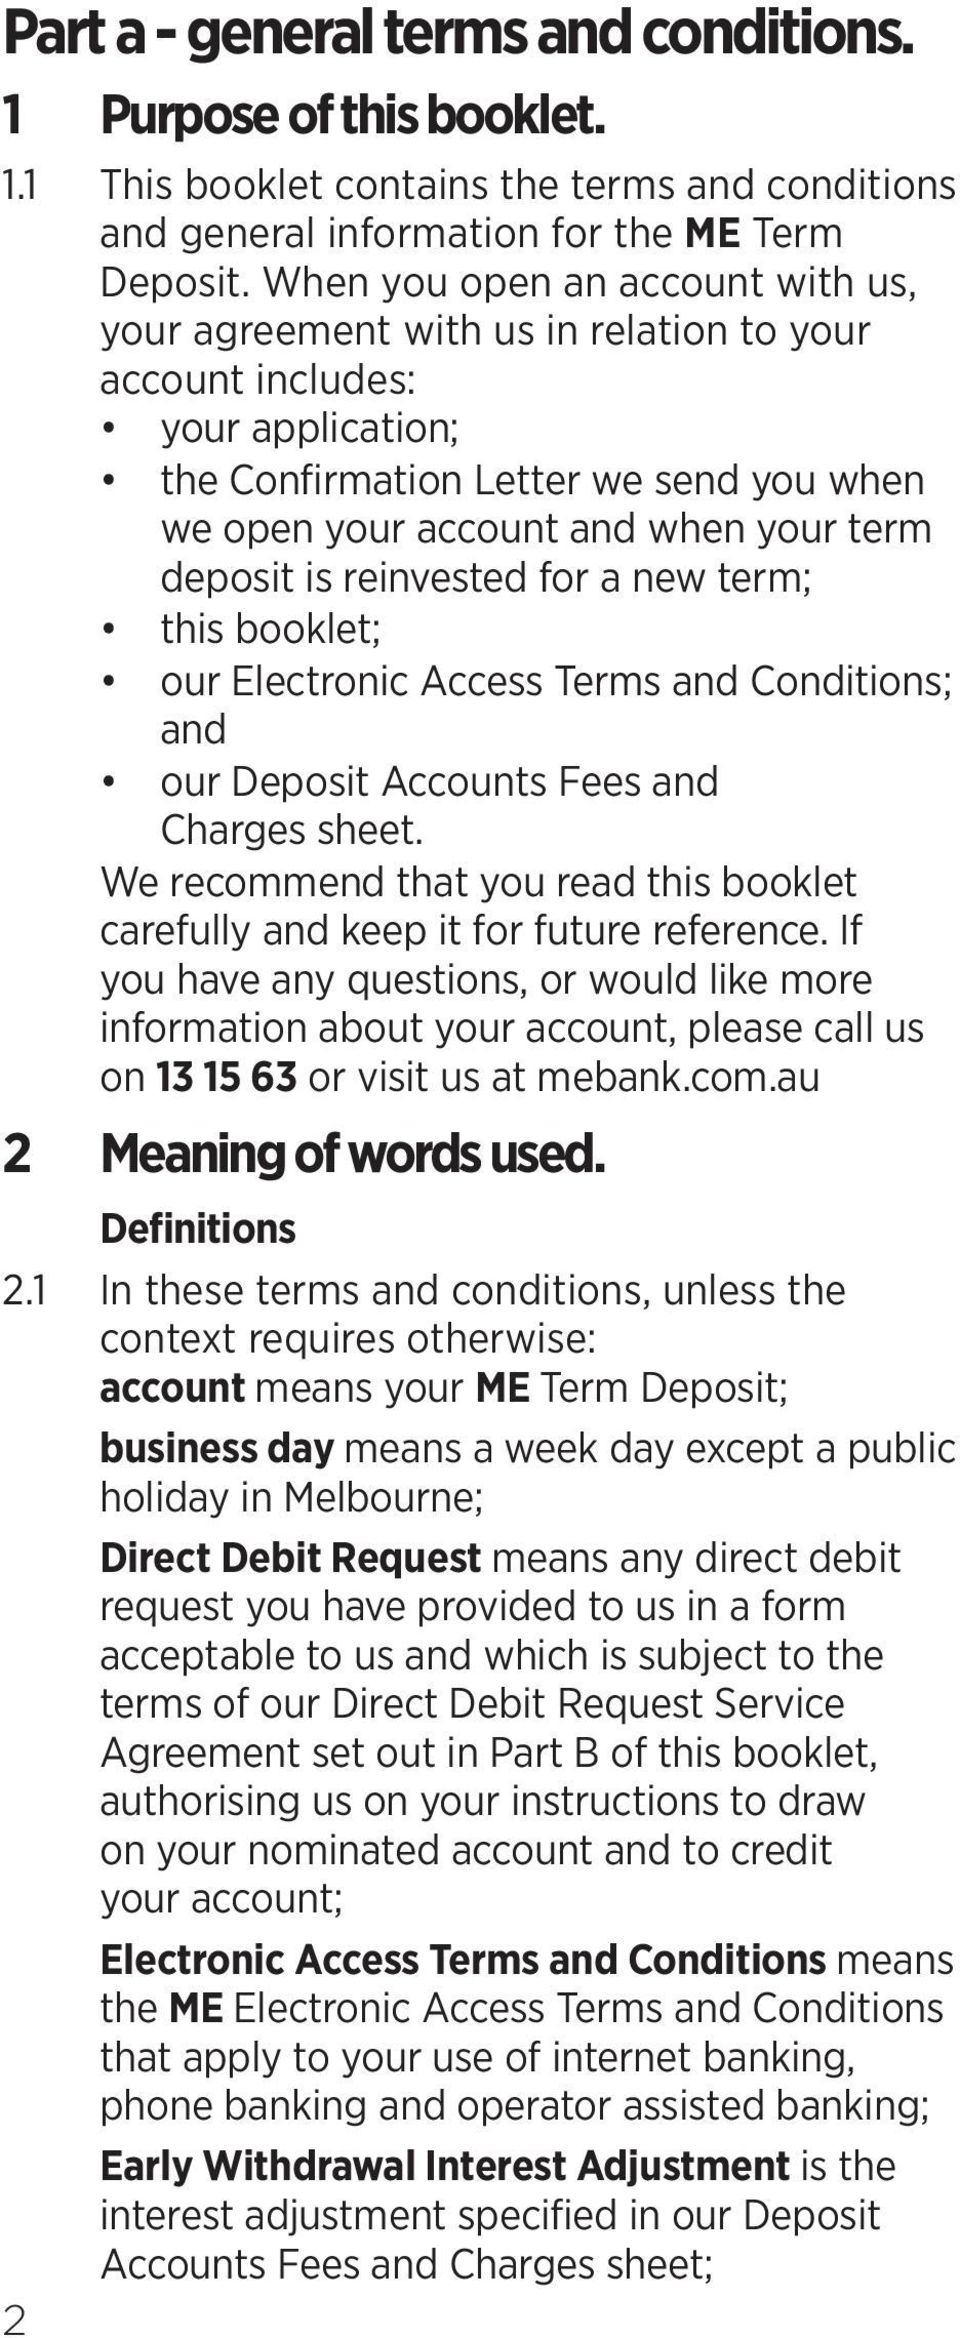 deposit is reinvested for a new term; this booklet; our Electronic Access Terms and Conditions; and our Deposit Accounts Fees and Charges sheet.